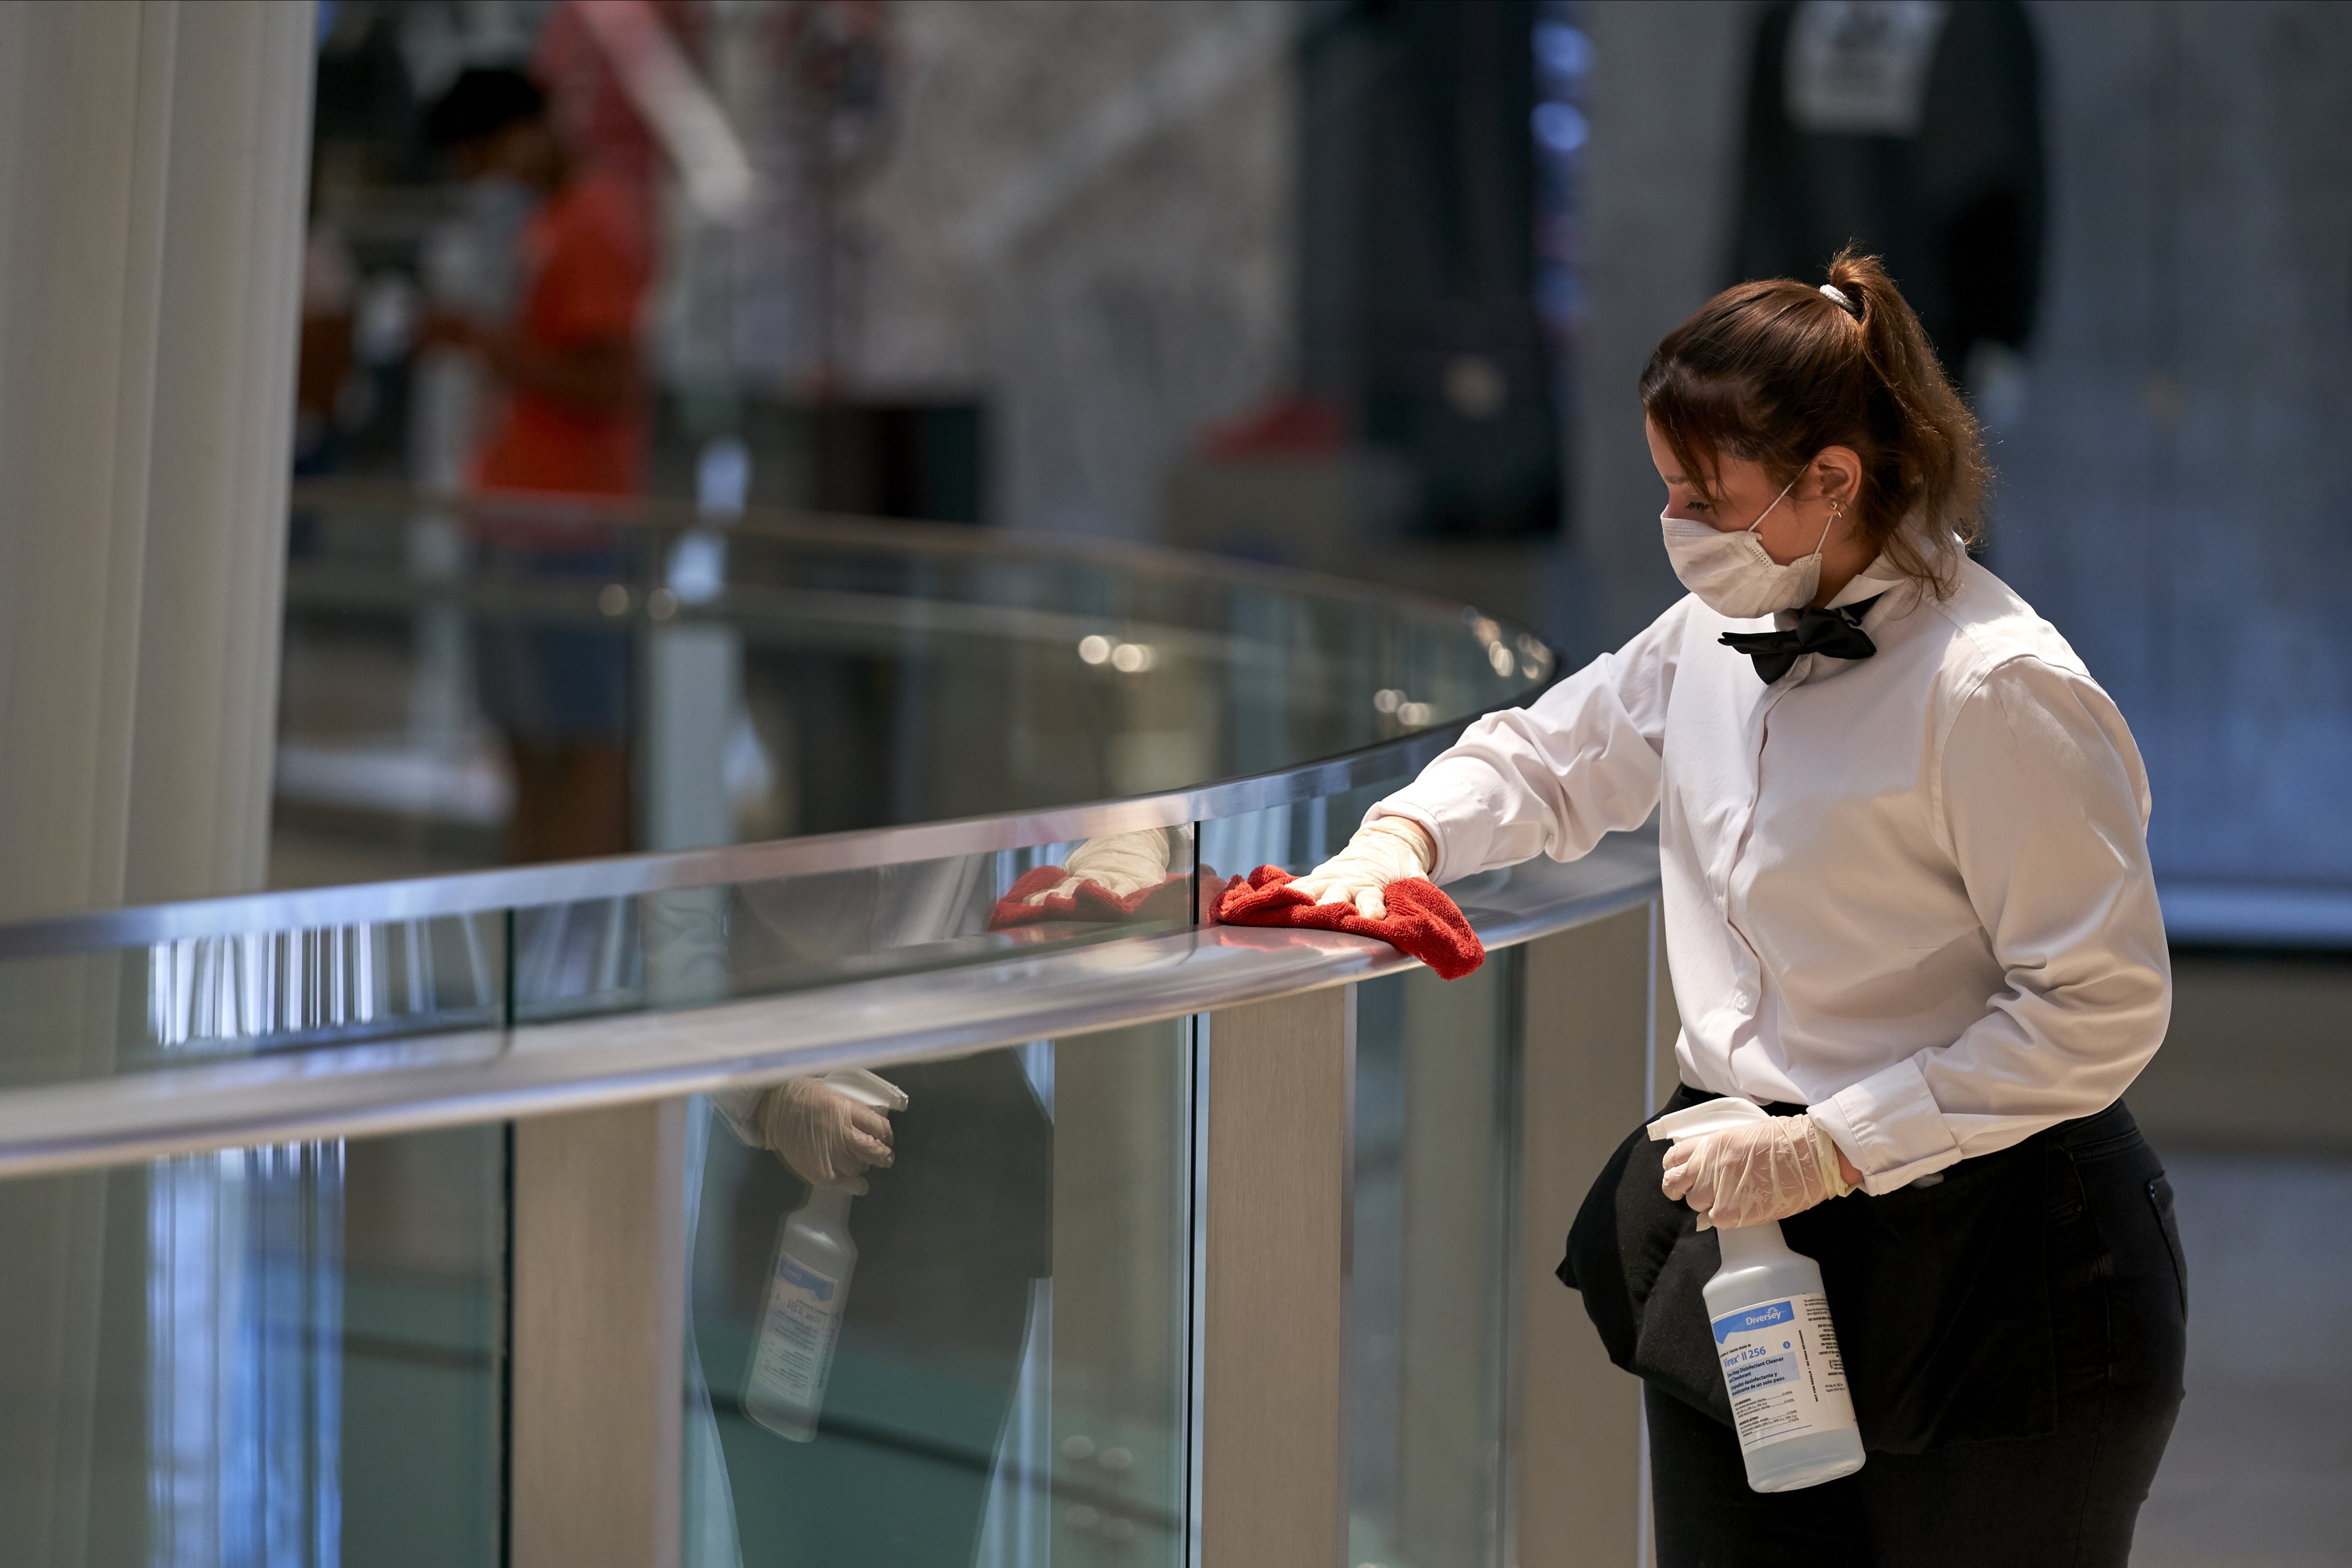 A worker disinfects hand rails at the Galleria Dallas mall in Dallas, Texas on May 4, 2020. (Cooper Neill—Bloomberg/Getty Images)